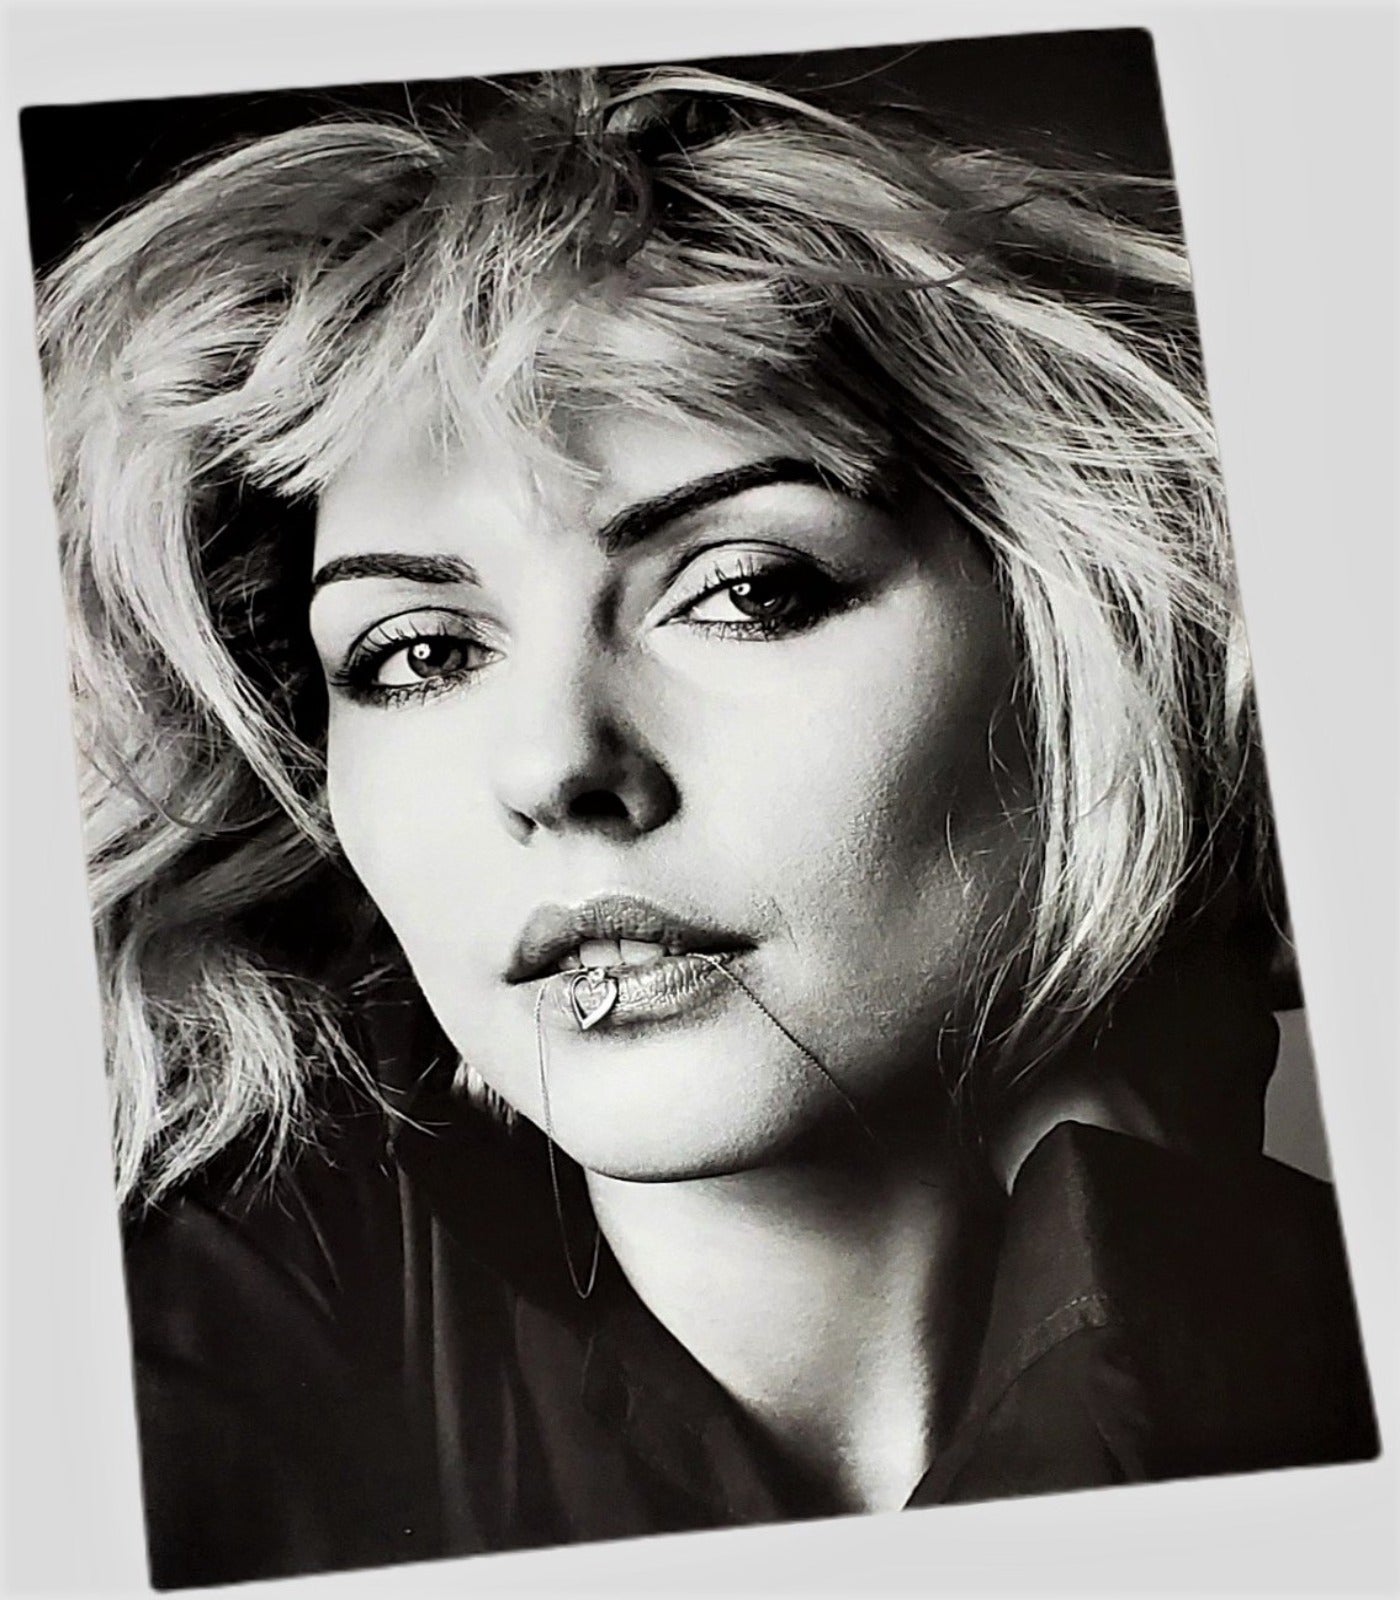 Debbie Harry photograph originally snapped in 1980 by Richard Avedon featured in Vogue x Music book 